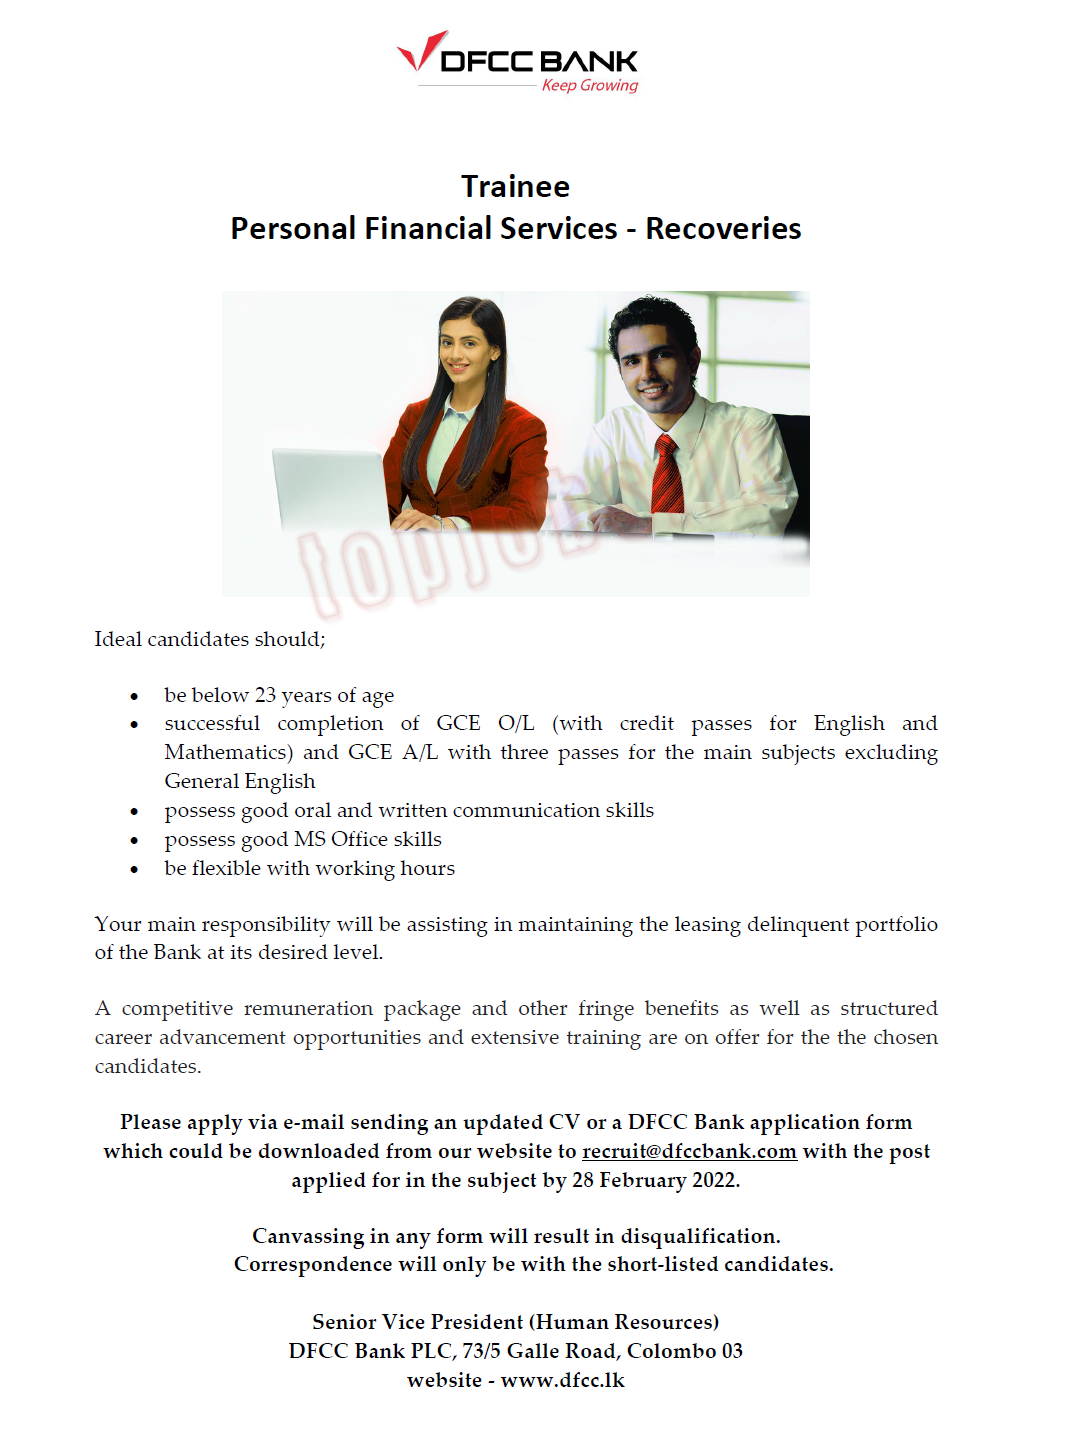 Trainee of PFS Recoveries Department Vacancies in DFCC Bank